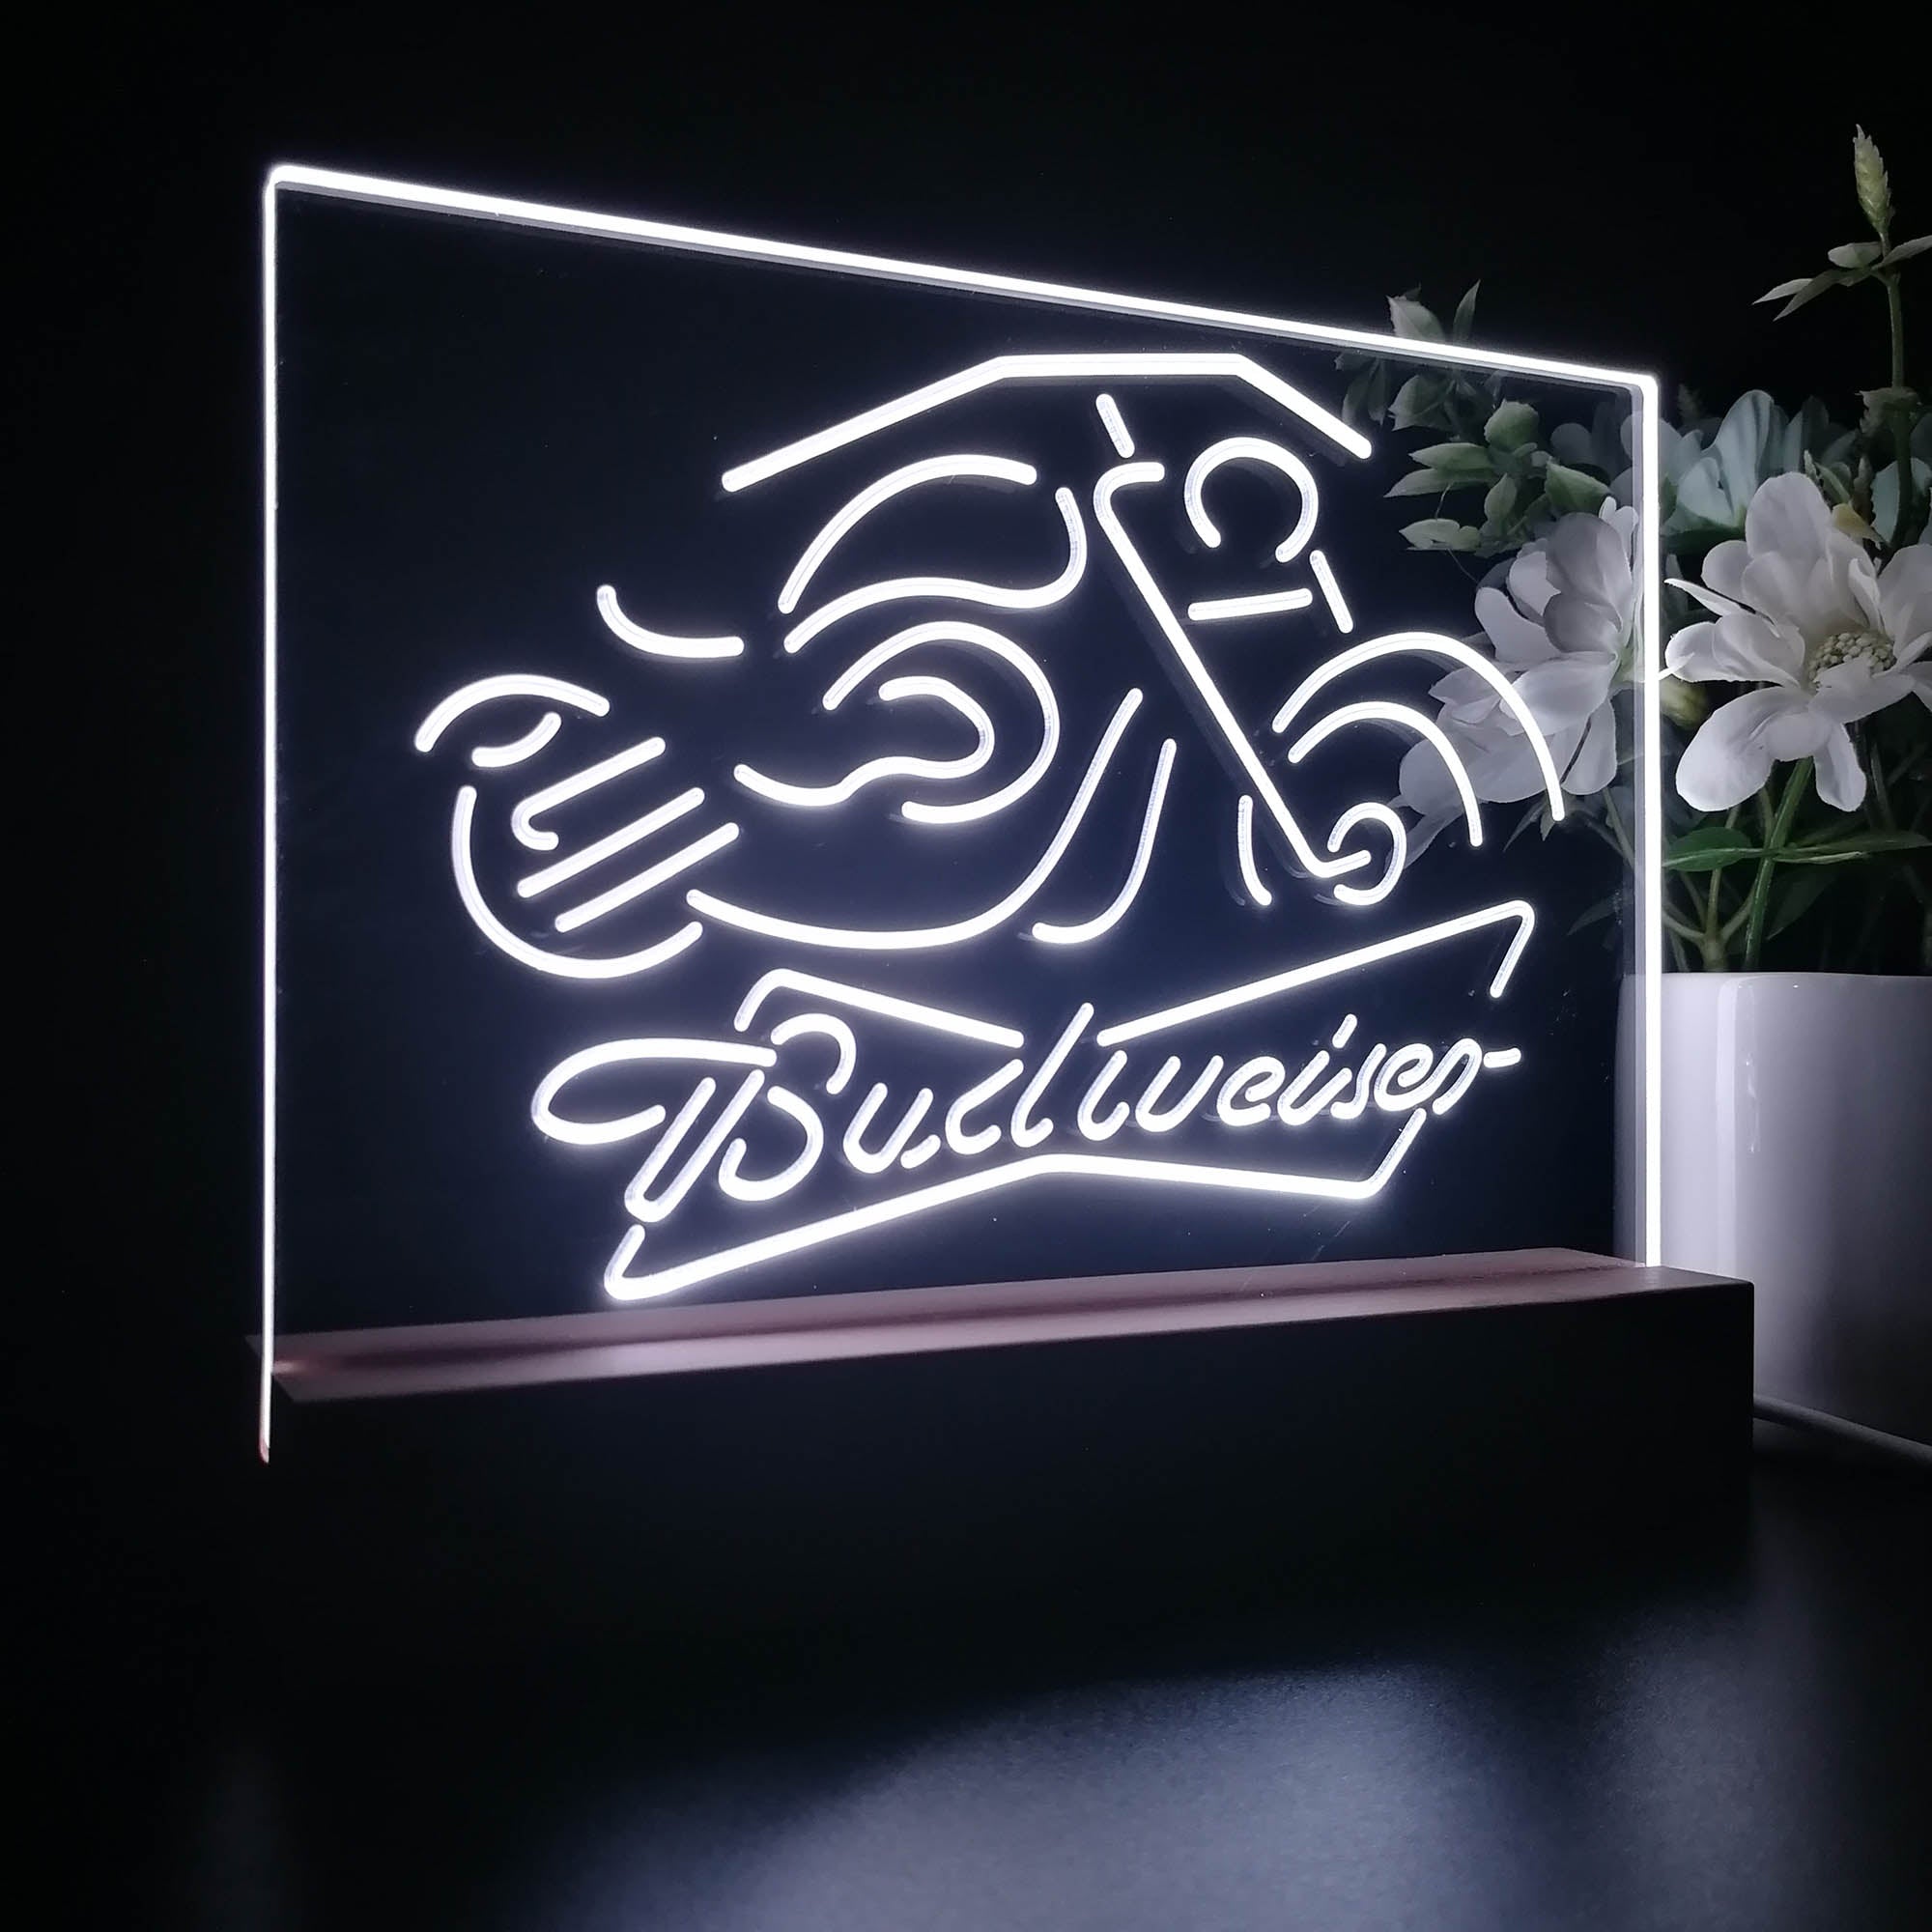 Budweiser Beer Motorcycle Night Light LED Sign